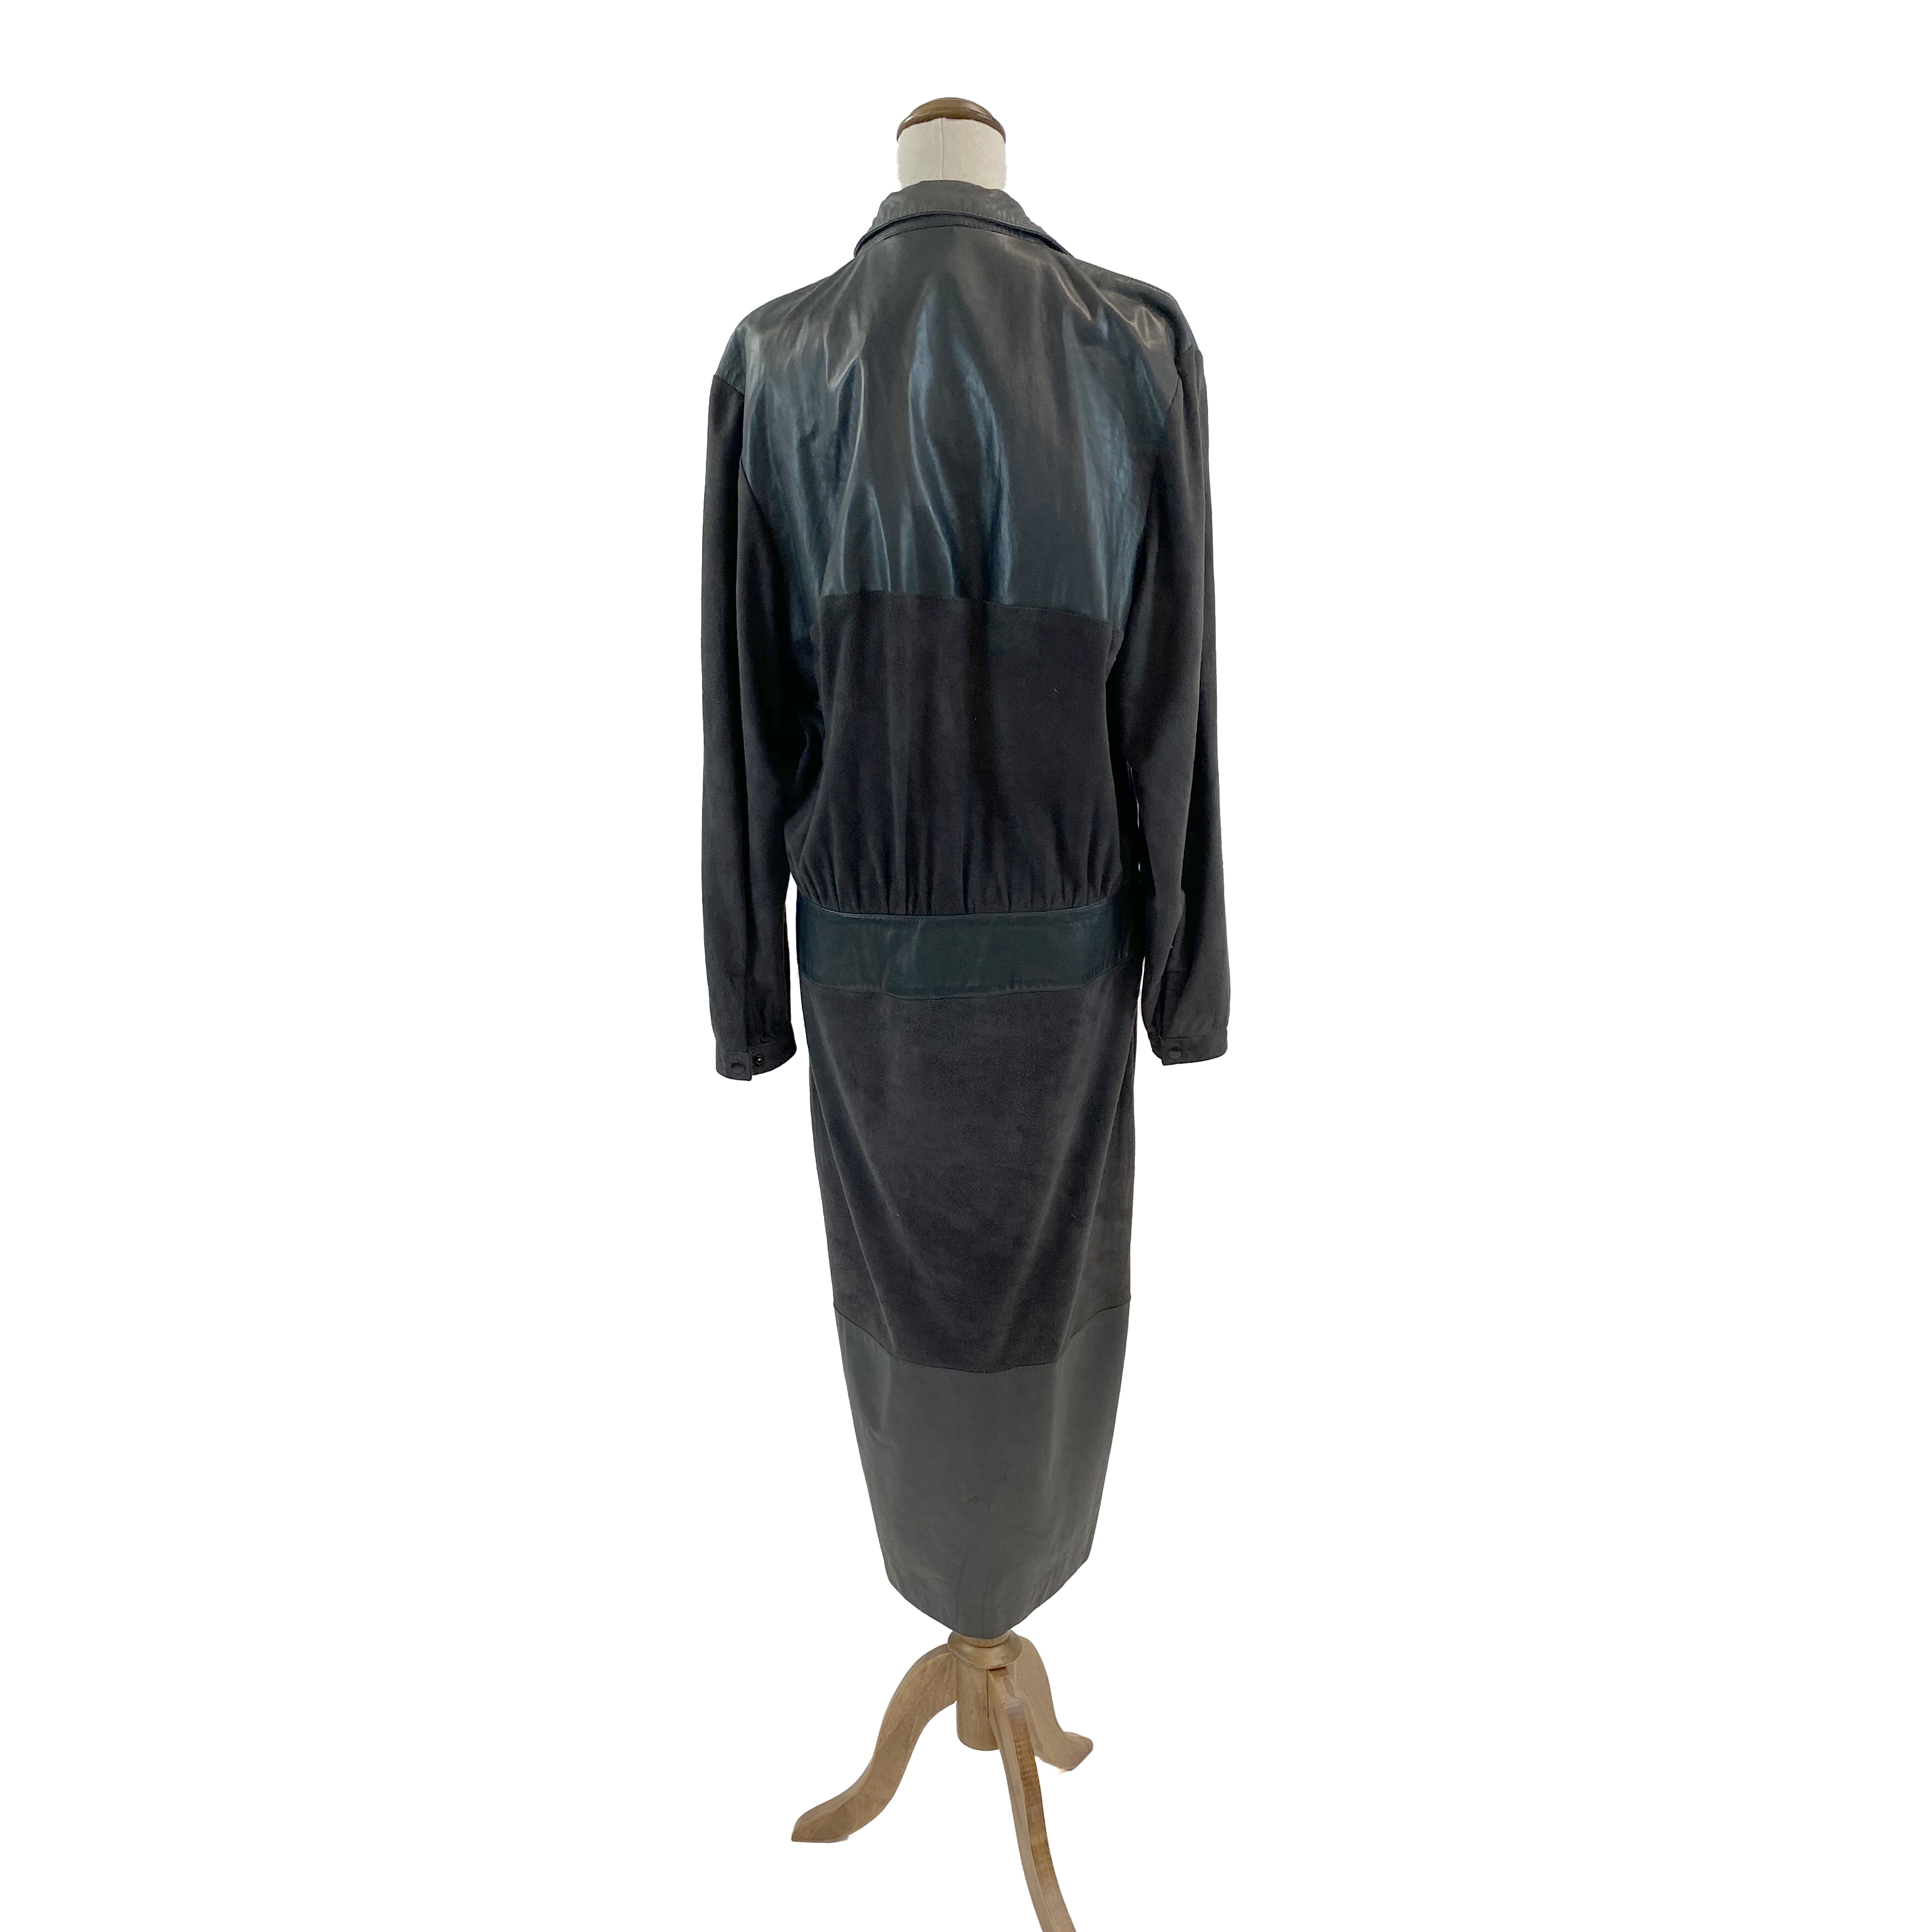 Vintage 80s George Gross Designs Leather/Suede Dress